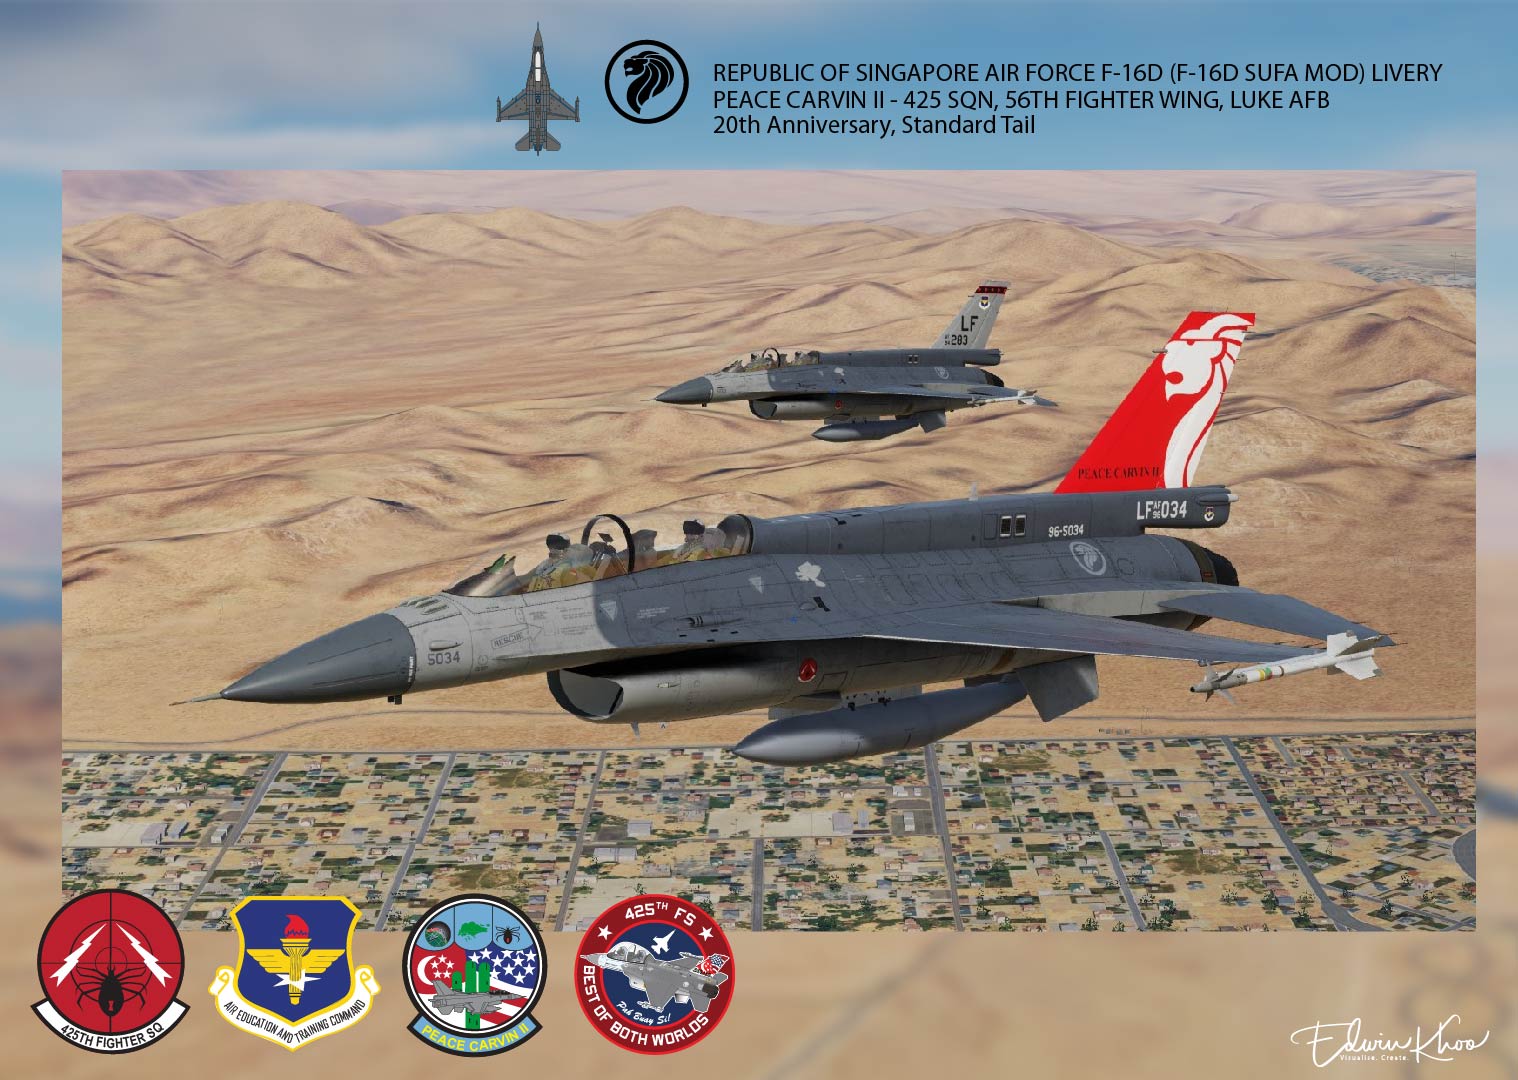 Republic of Singapore Air Force (RSAF) Livery for the F-16D (IDF Mods Project - F-16I Sufa v2.2) Part 2 of 3